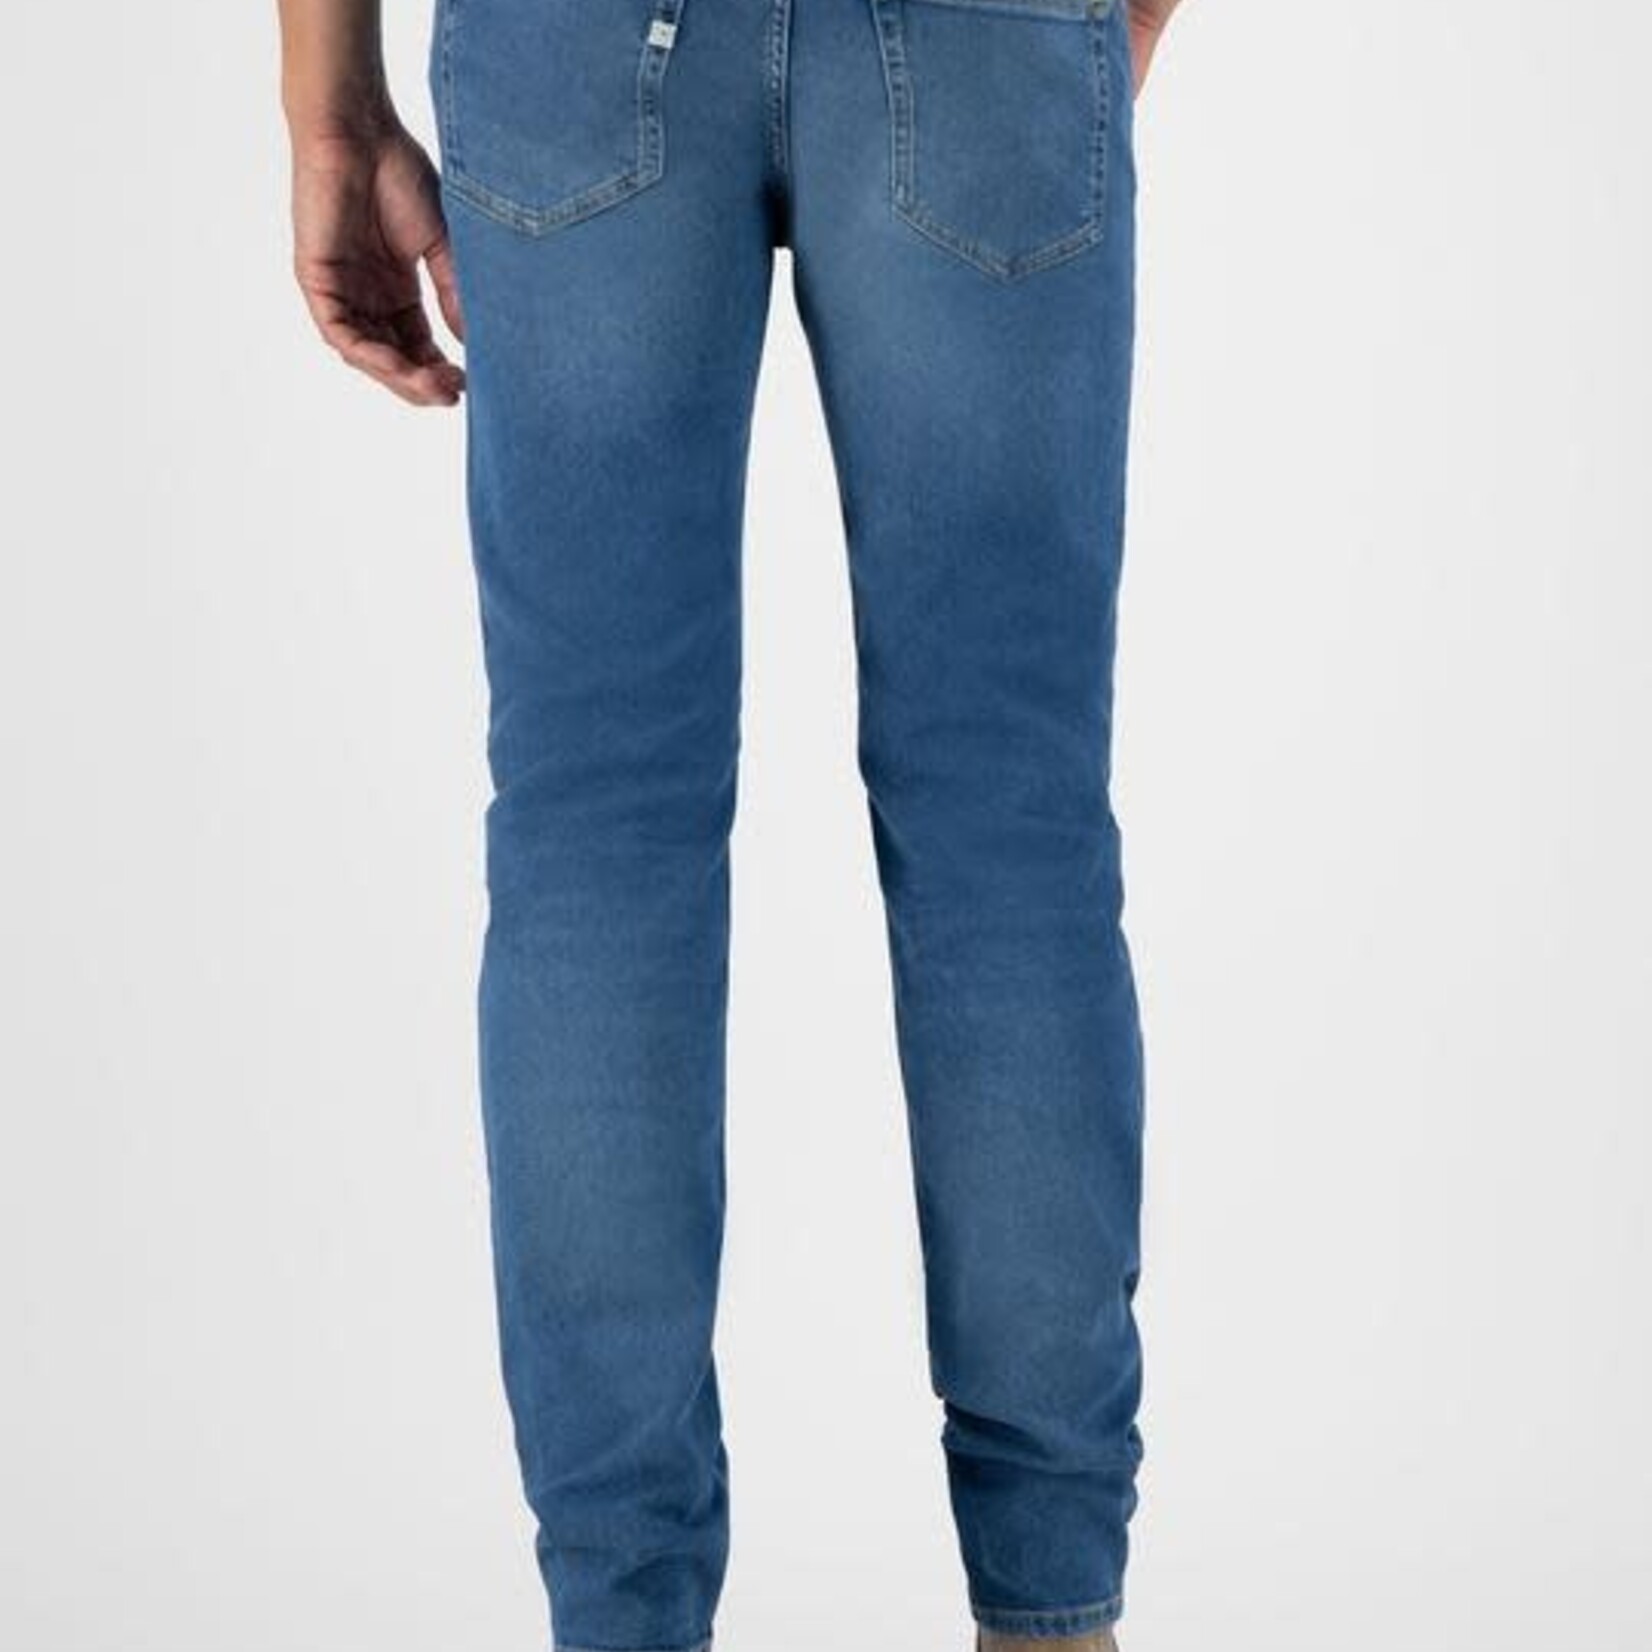 MUD JEANS MUD JEANS REGULAR DUNN STRETCH PURE BLUE